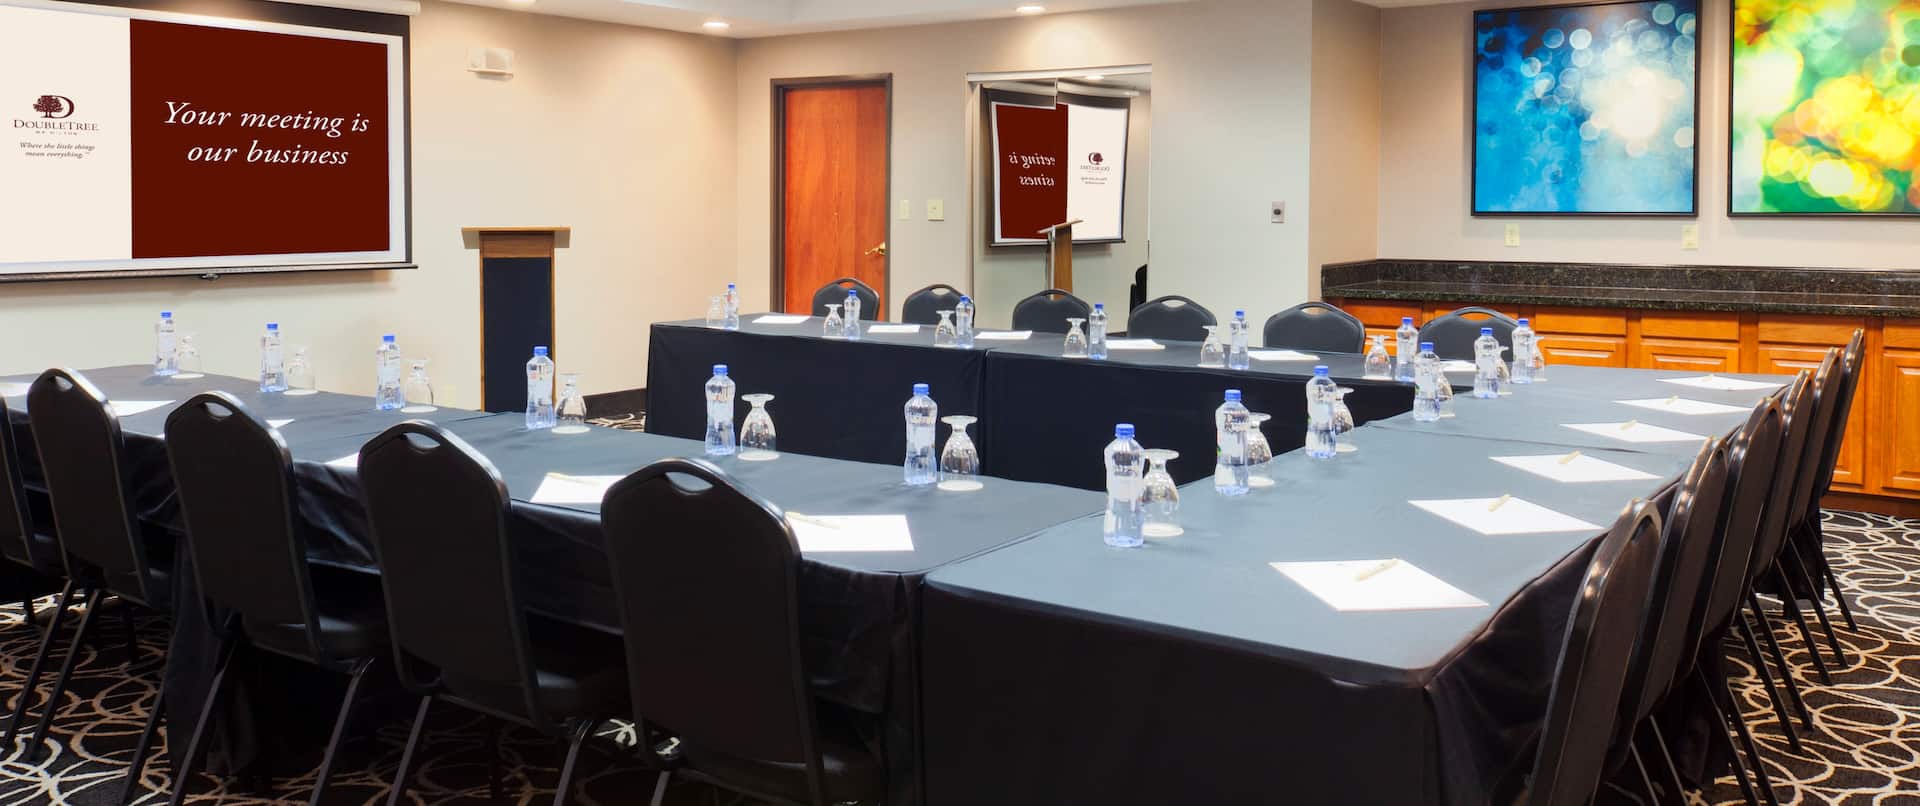 Meeting Room With Water Bottles and Drinking Glasses on U-Shaped Table, Chairs, TV, Podium, Entry, Wall Mirror, and Wall Art